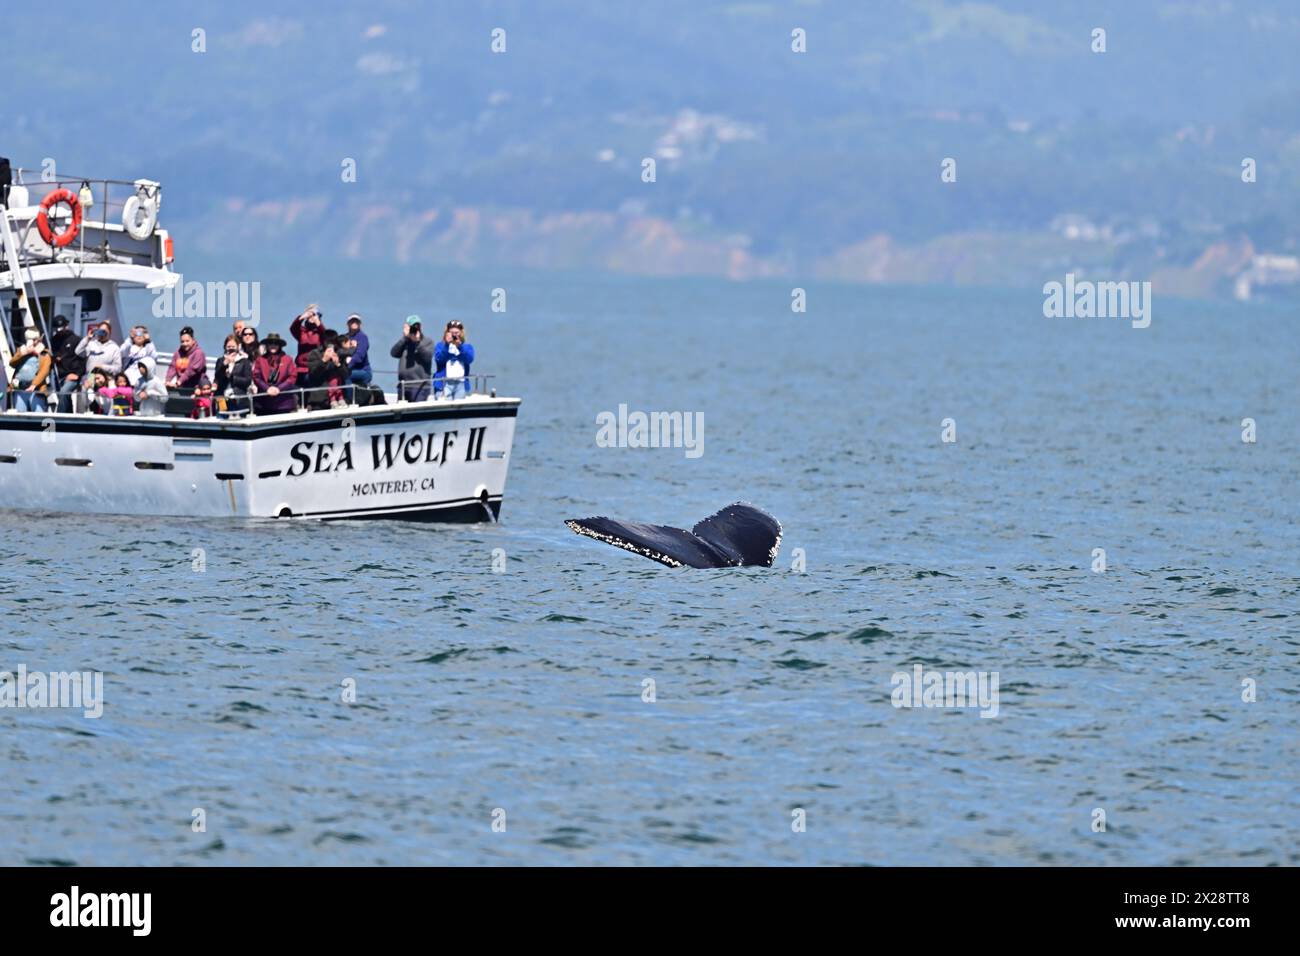 Whale and whale-watching boat Stock Photo